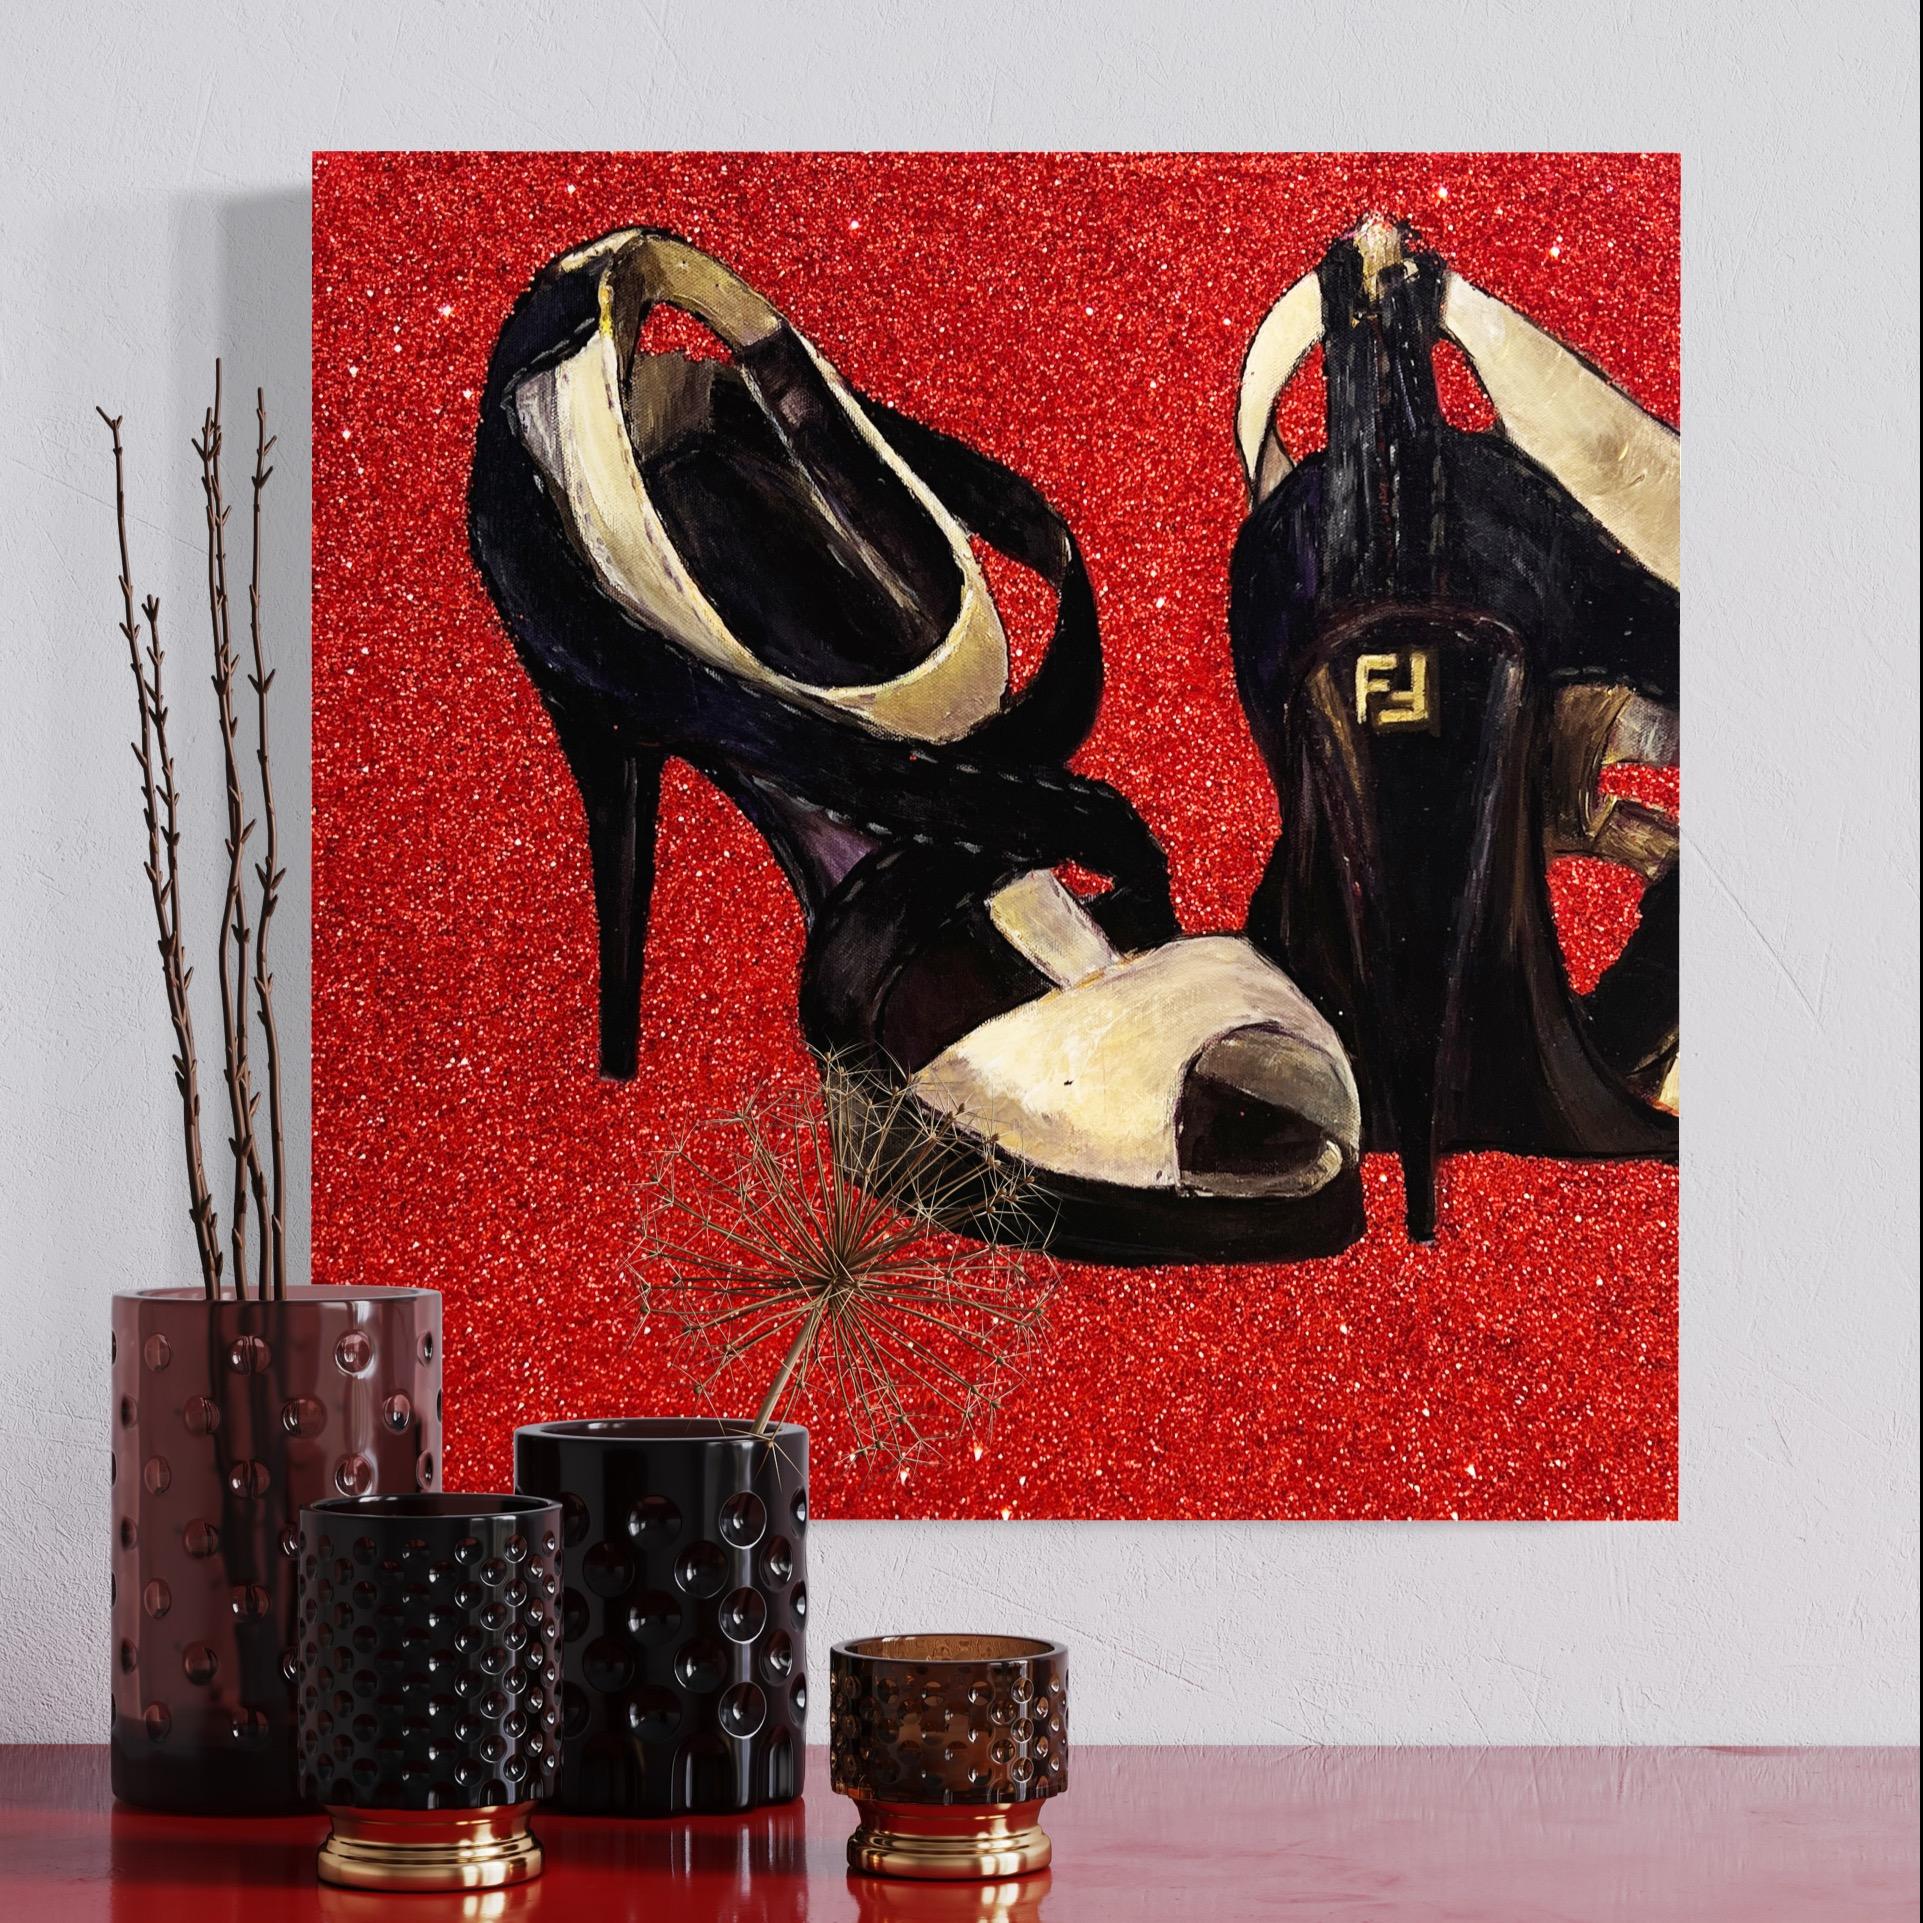 This 18 inch square mixed media painting on canvas is wired and ready to hang. It is hand signed by the artist on the back of the artwork. The background is covered in red glitter which makes the artwork sparkle.

For over 20+ years, Haleh Mashian’s